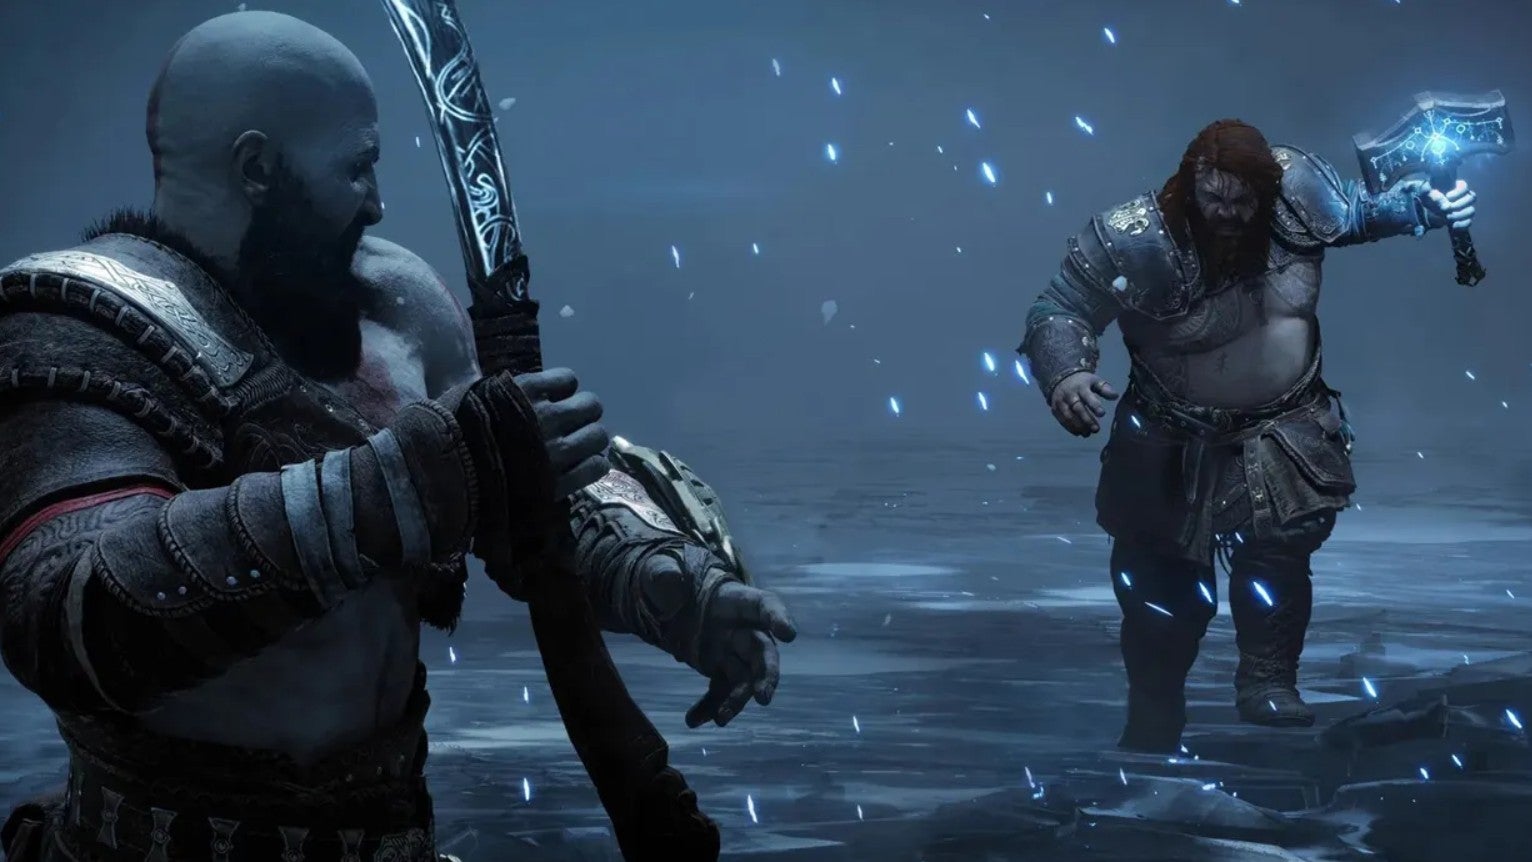 Image for Thor's Kratos fight ended differently in early outline of God of War Ragnarök